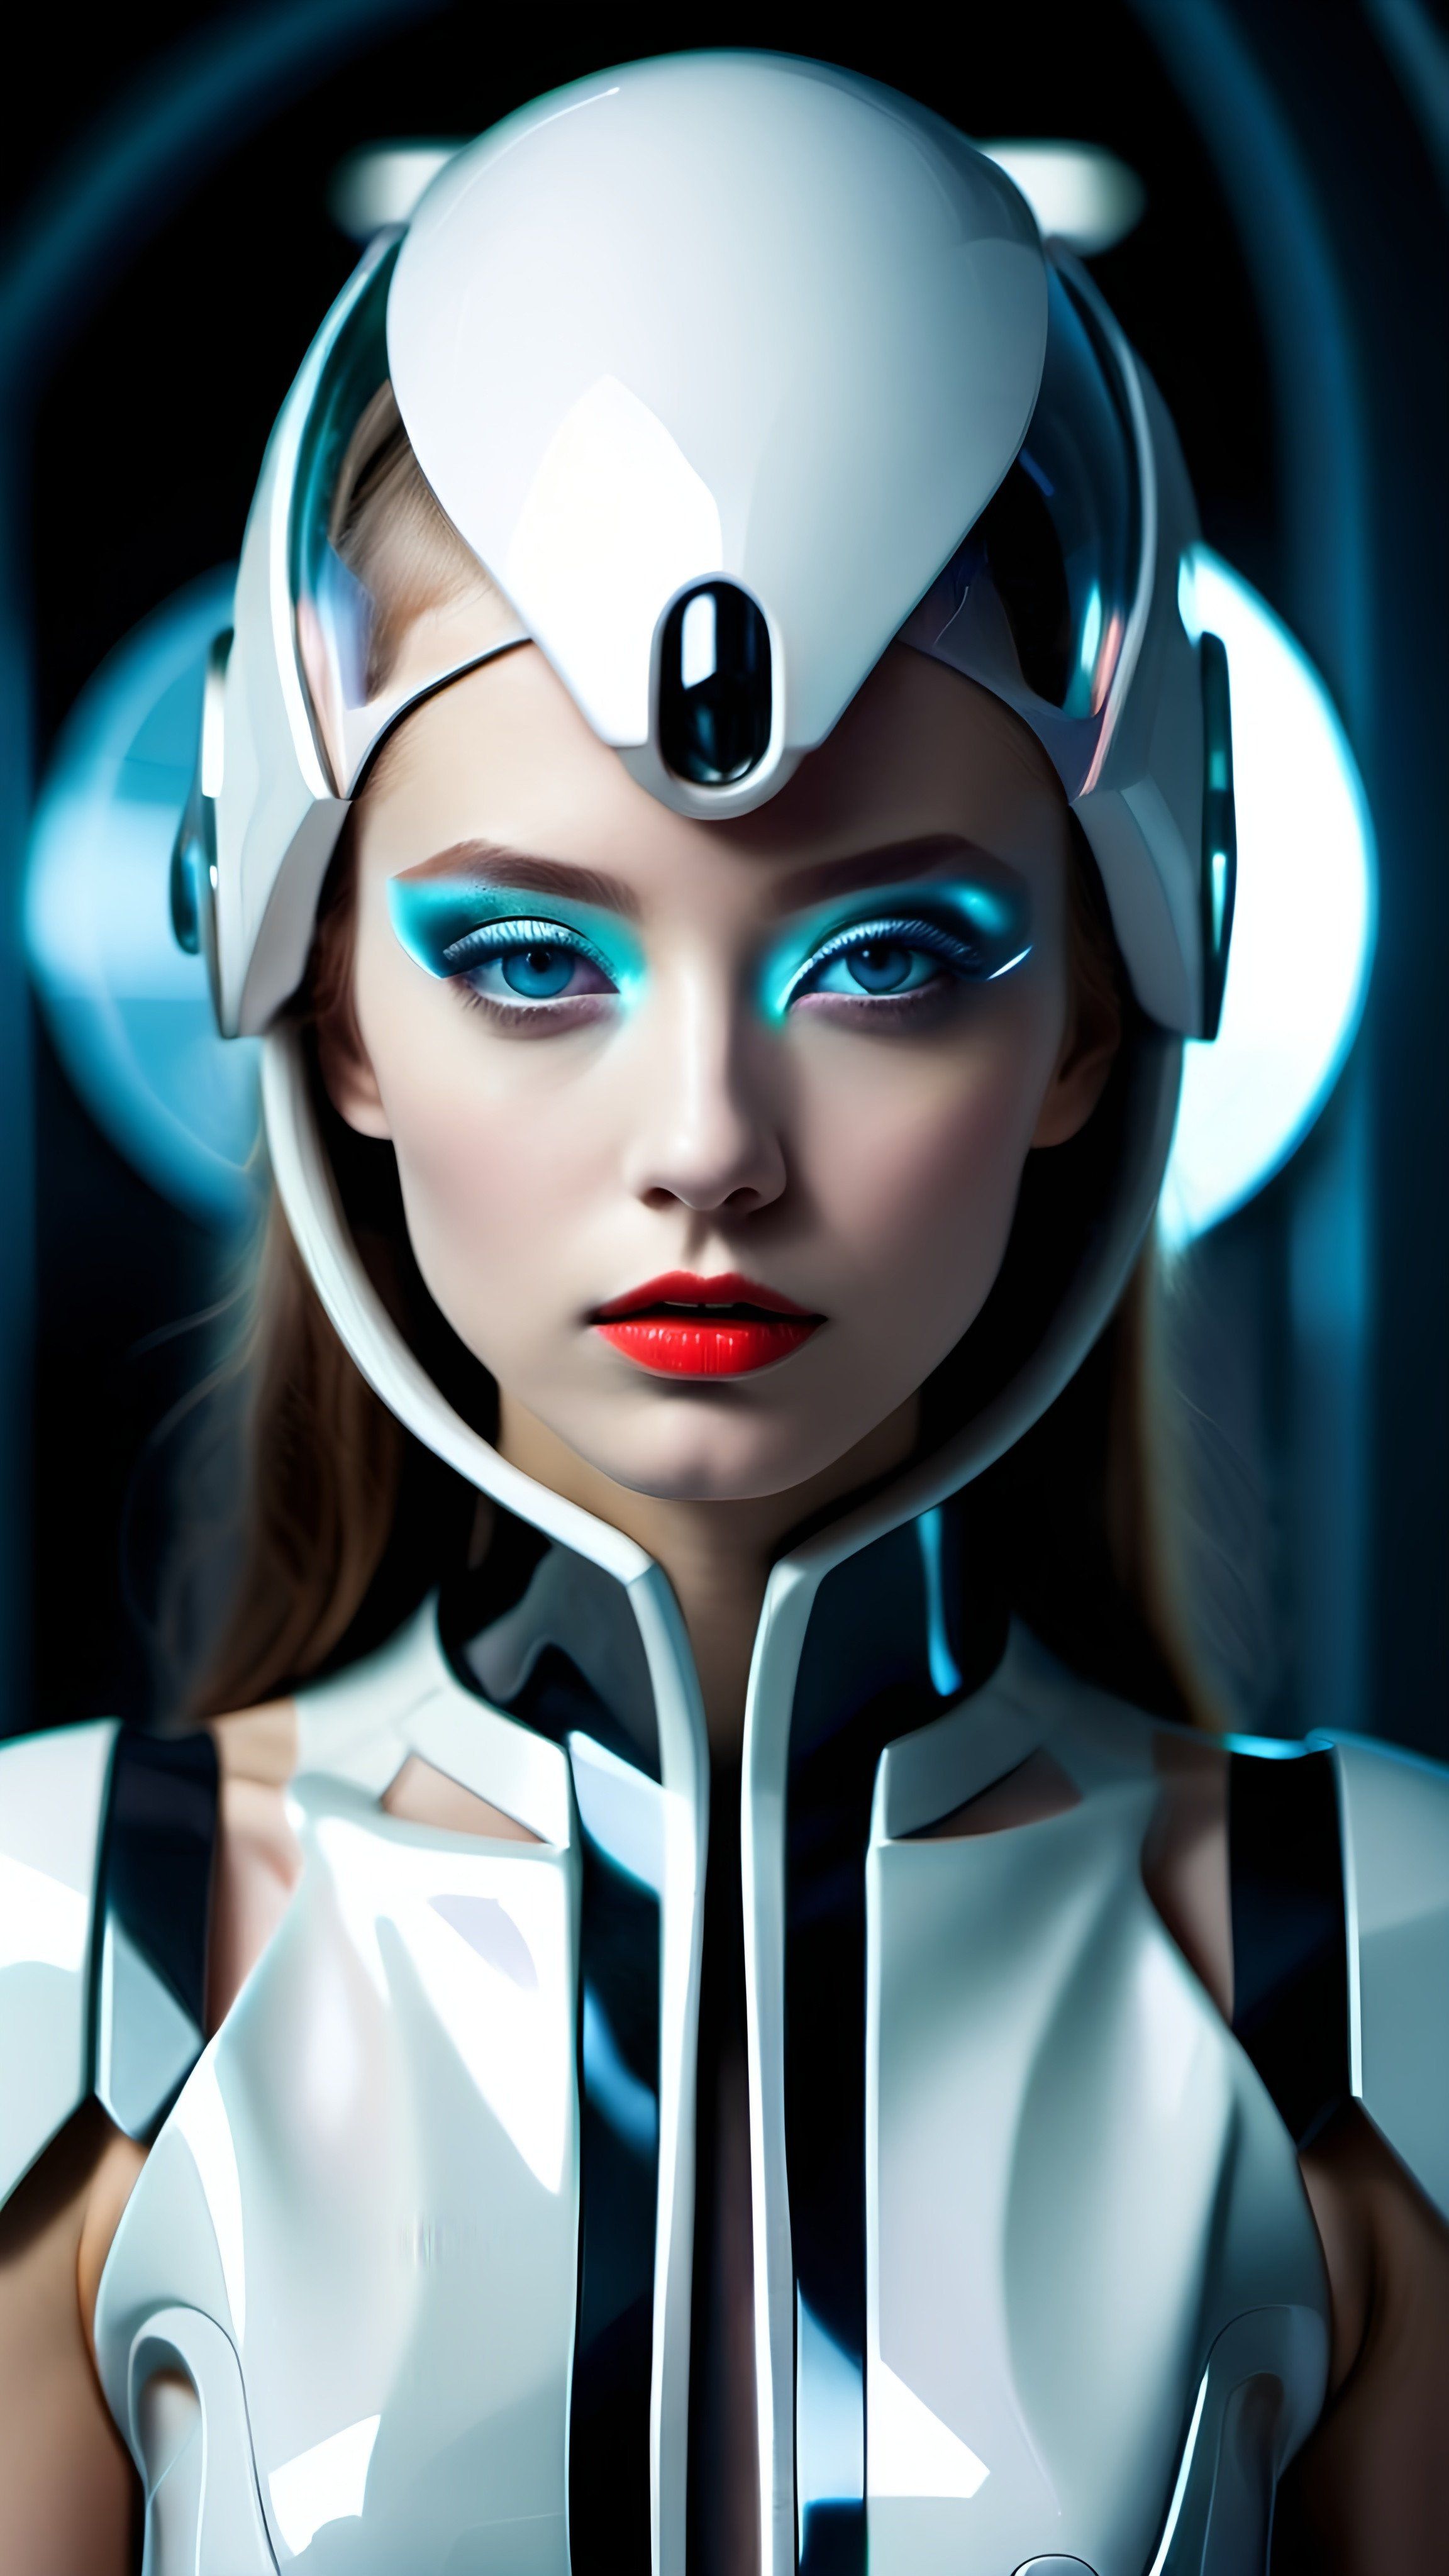 Prompt: a woman with a futuristic helmet and headphones on her head and a futuristic suit on her body and head, cyberpunk style, cyberpunk art